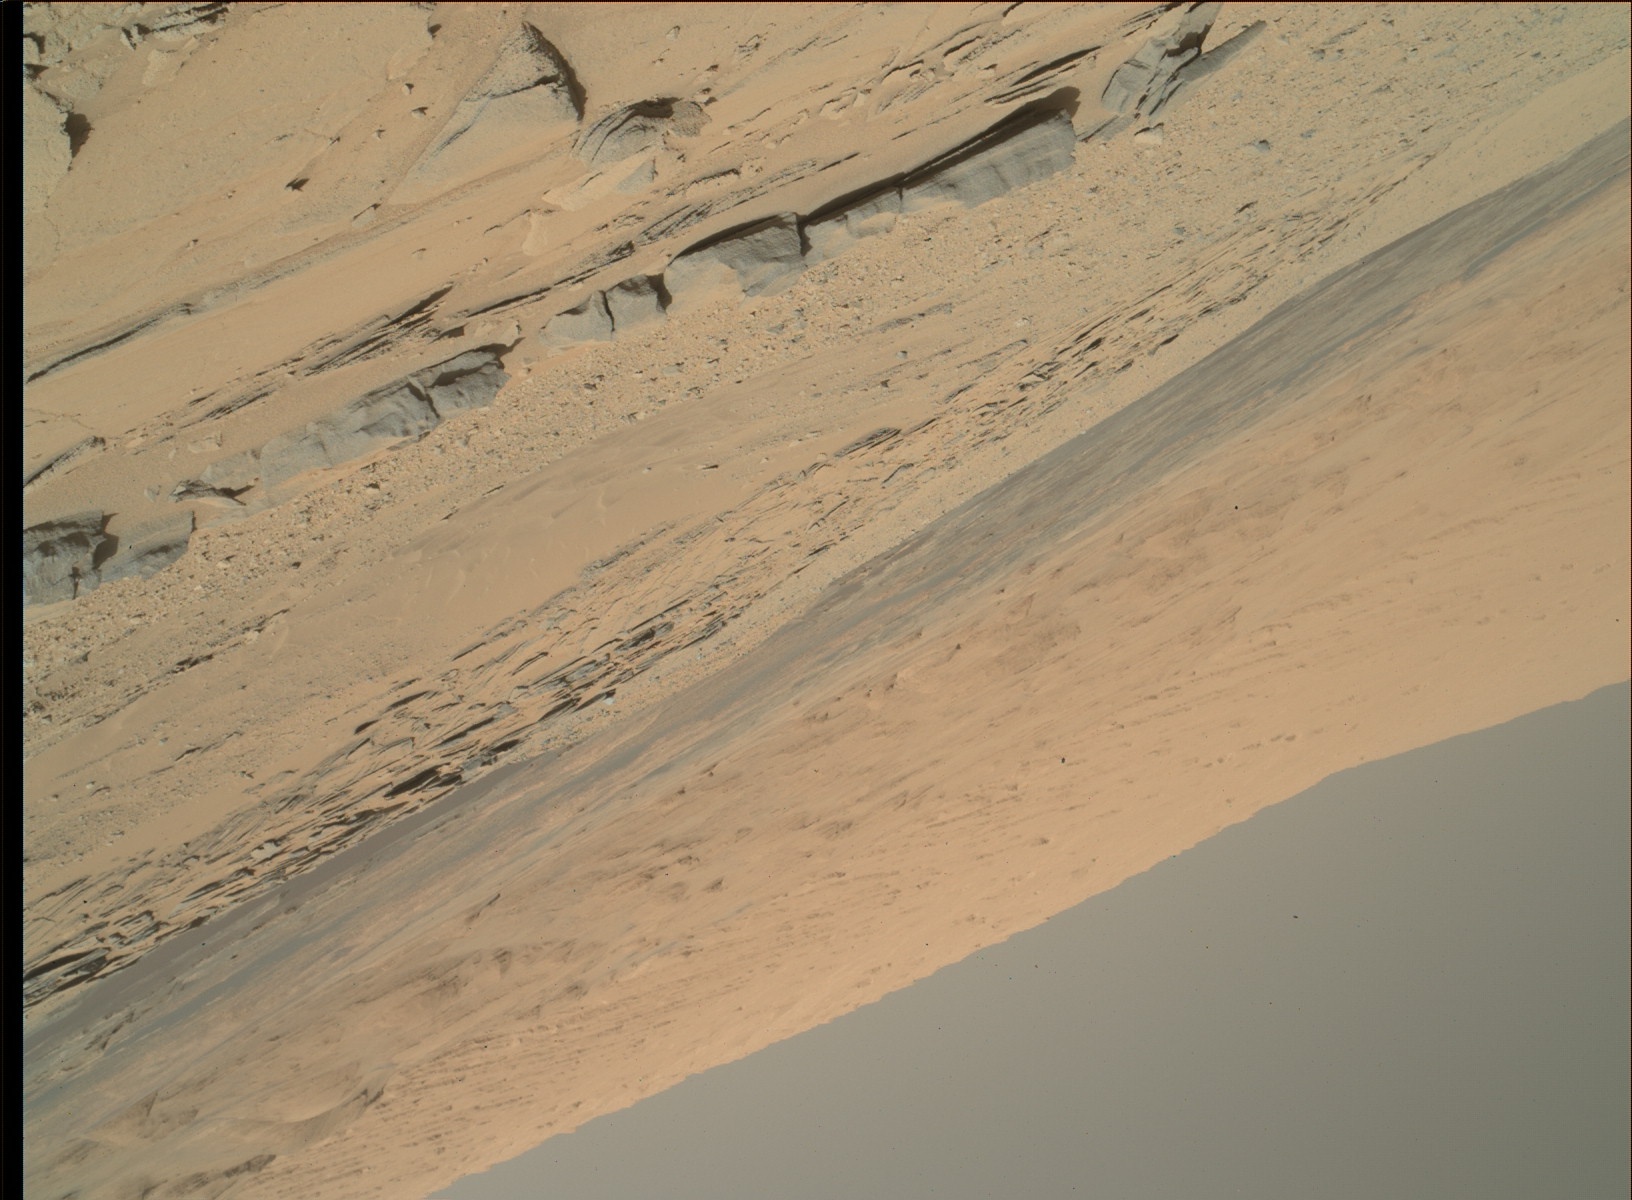 Nasa's Mars rover Curiosity acquired this image using its Mars Hand Lens Imager (MAHLI) on Sol 597